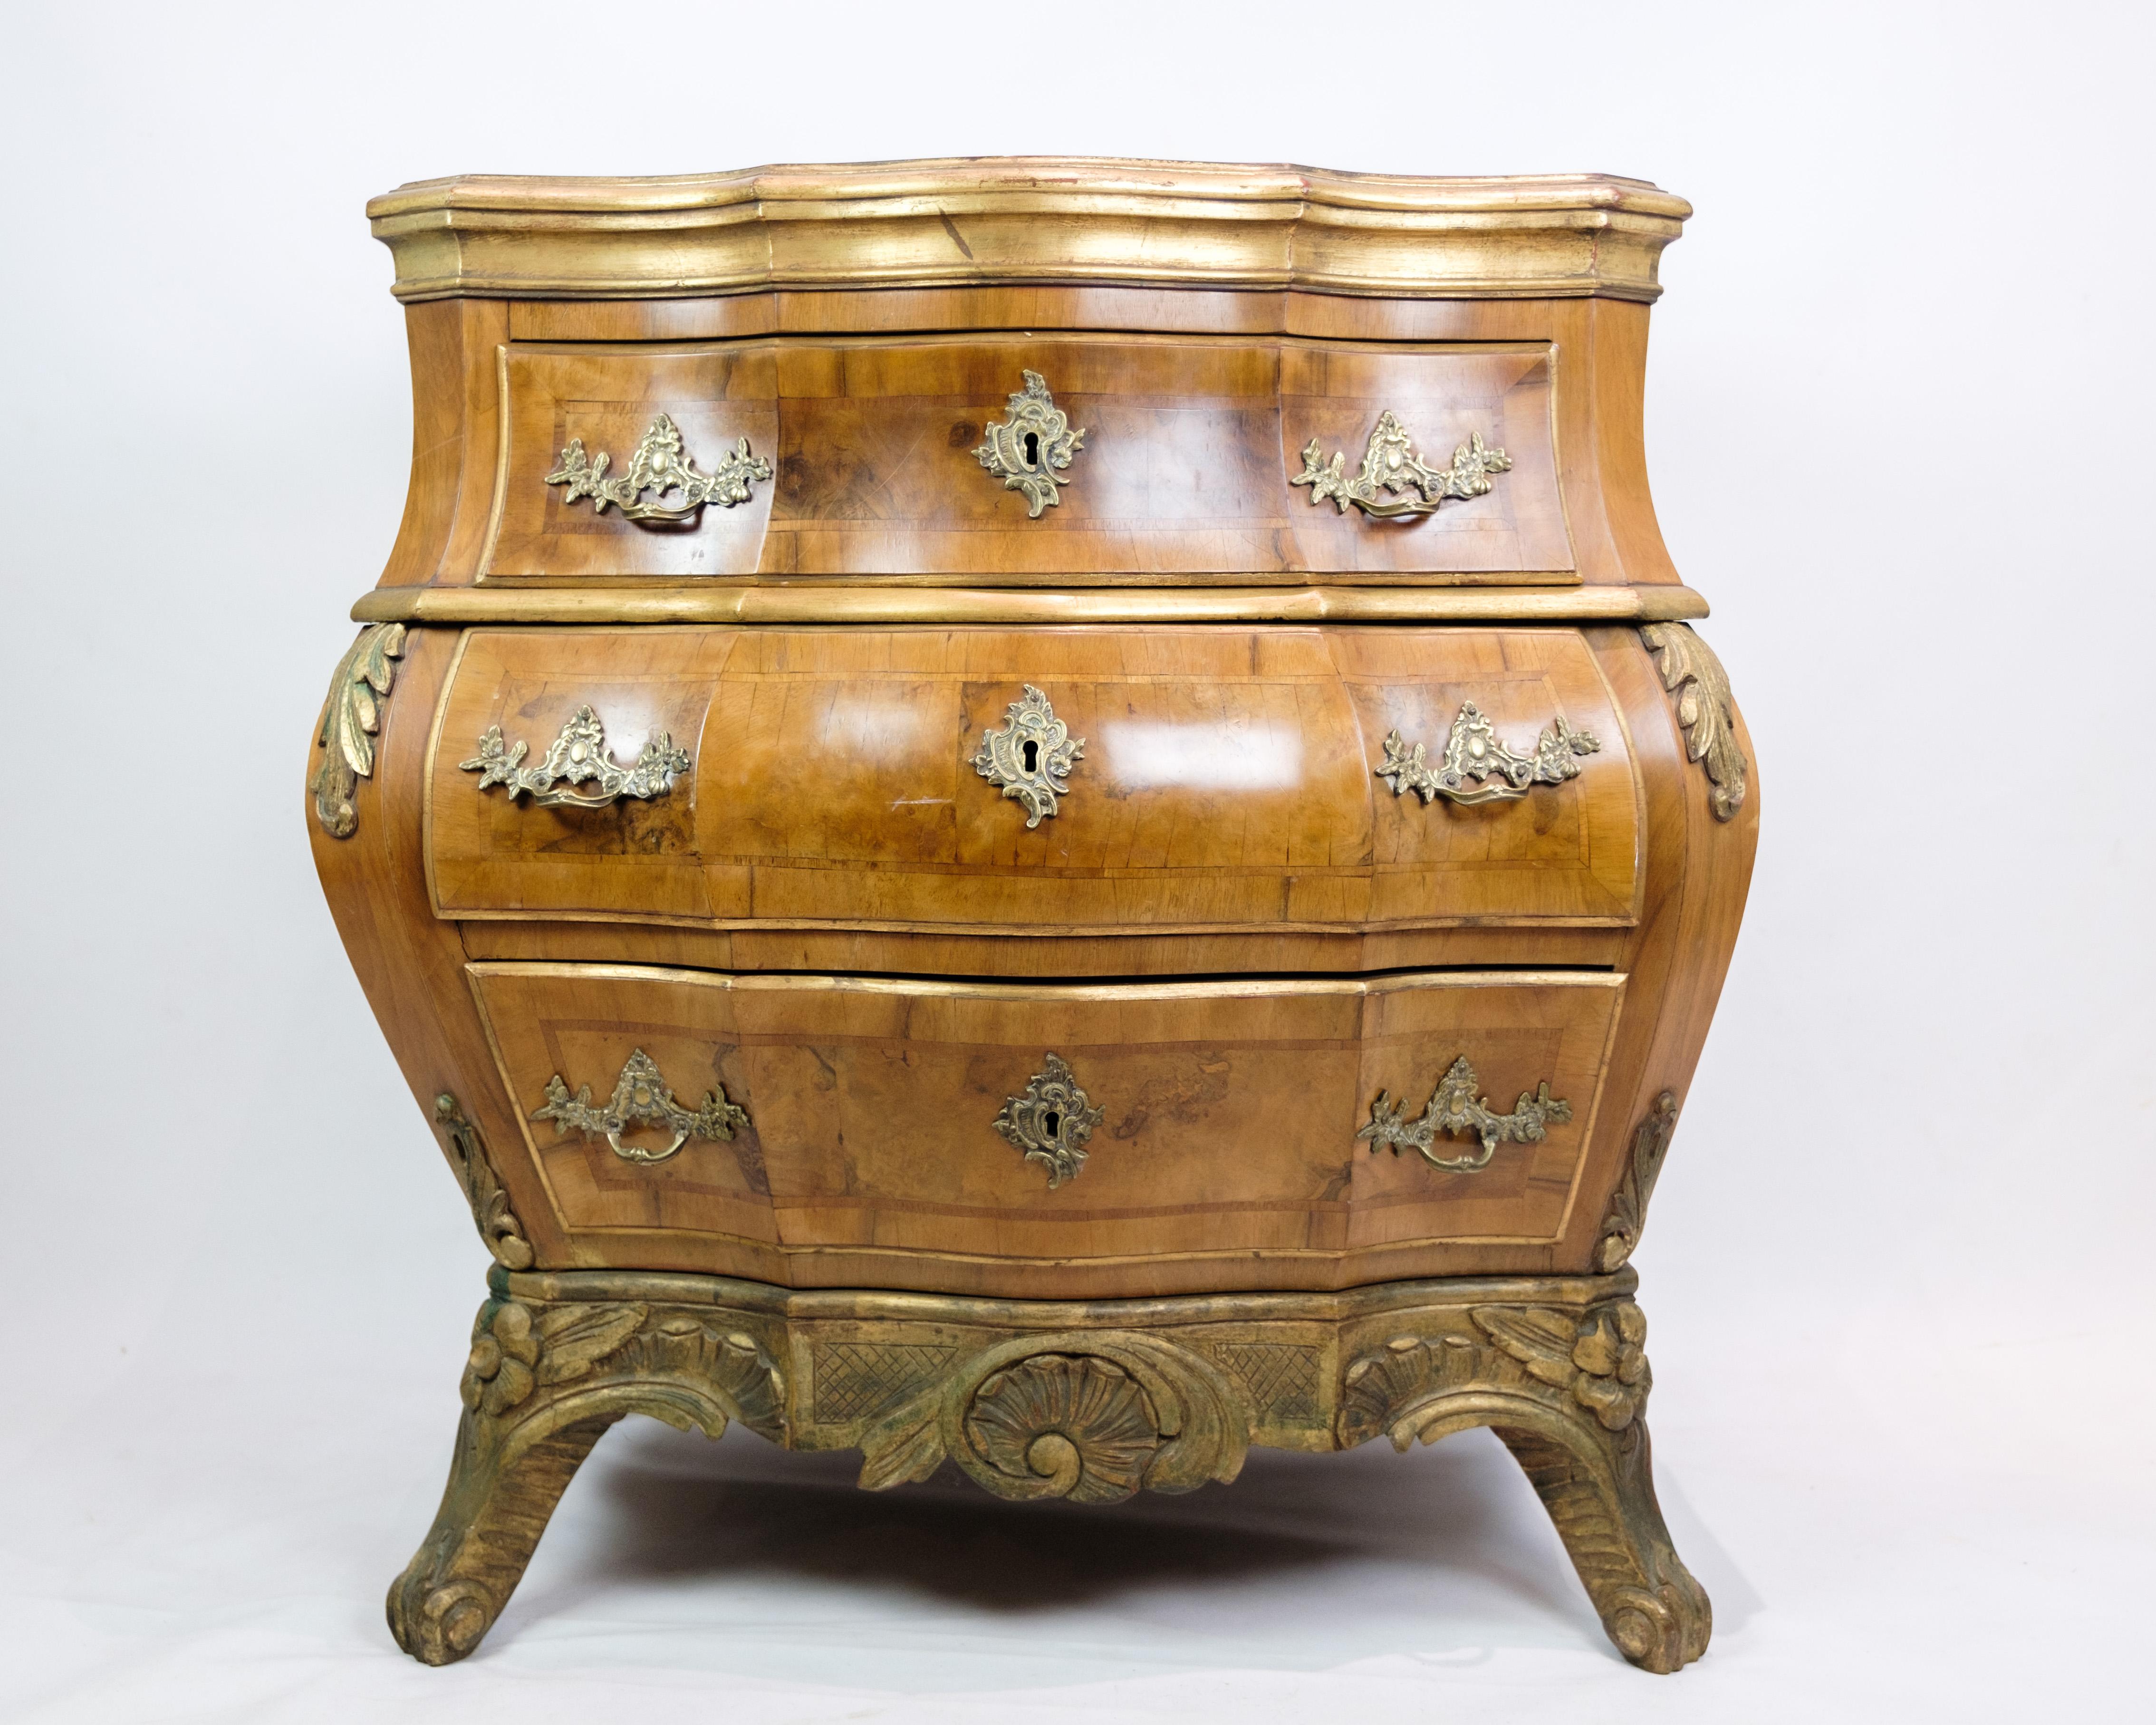 Bring an antique elegance into your home with this rococo bombé-shaped walnut dresser of Danish origin, dating to around the 1880s. This chest of drawers represents an era of opulent design and craftsmanship characteristic of the Rococo style.

The